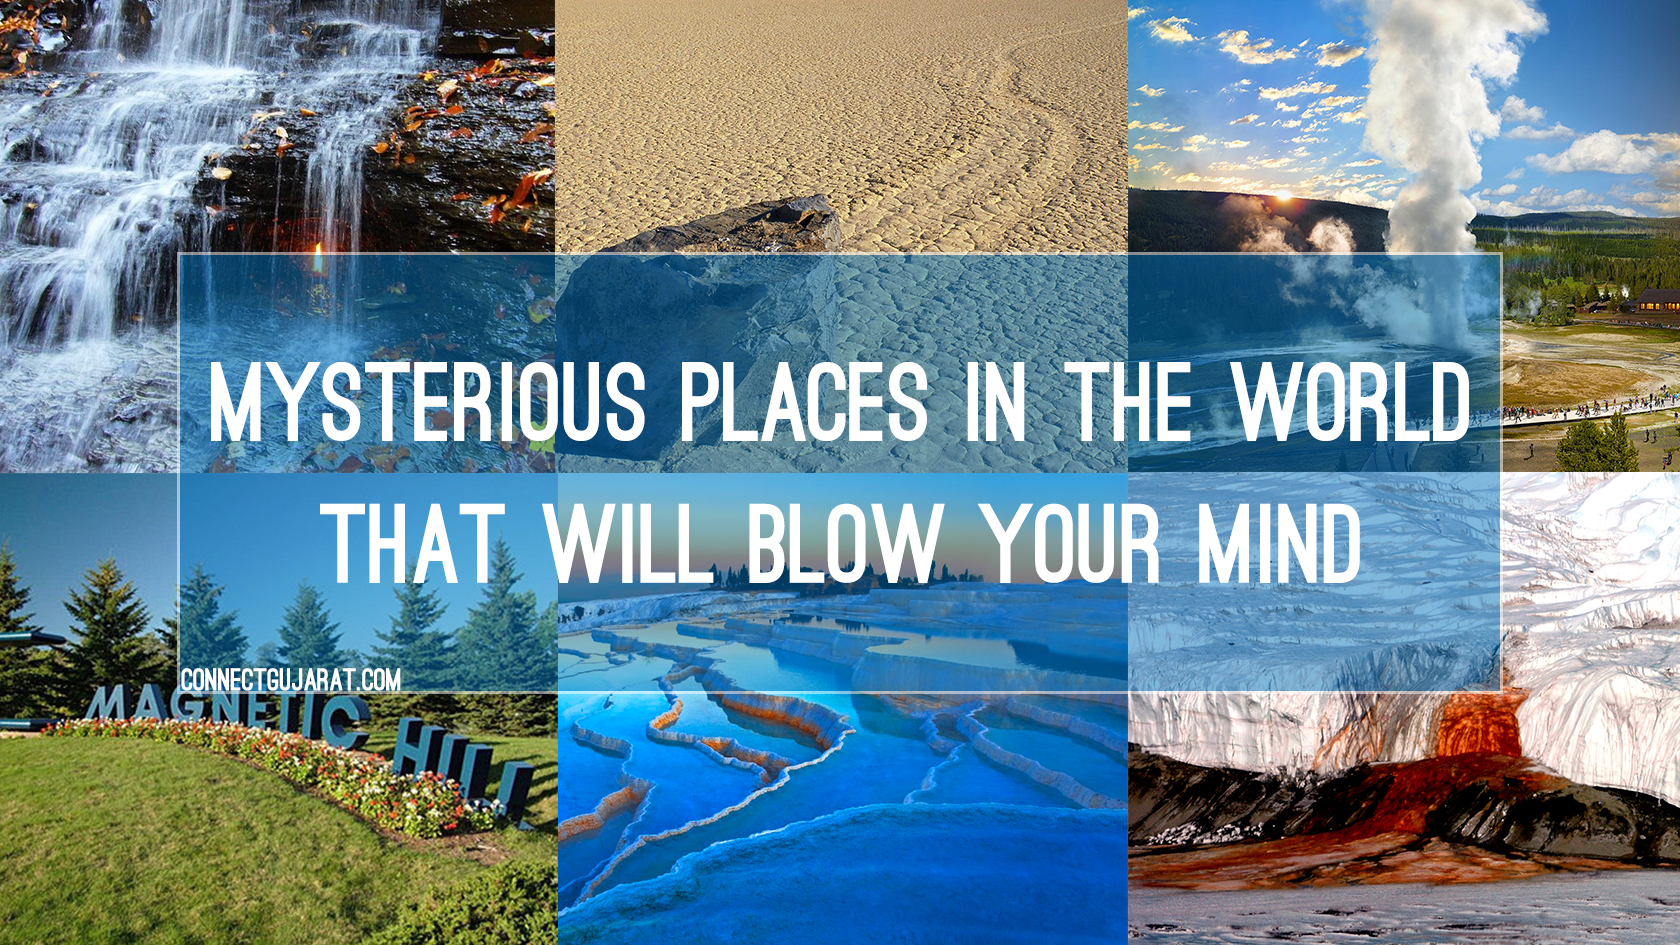 Mysterious places in the world that will blow your mind